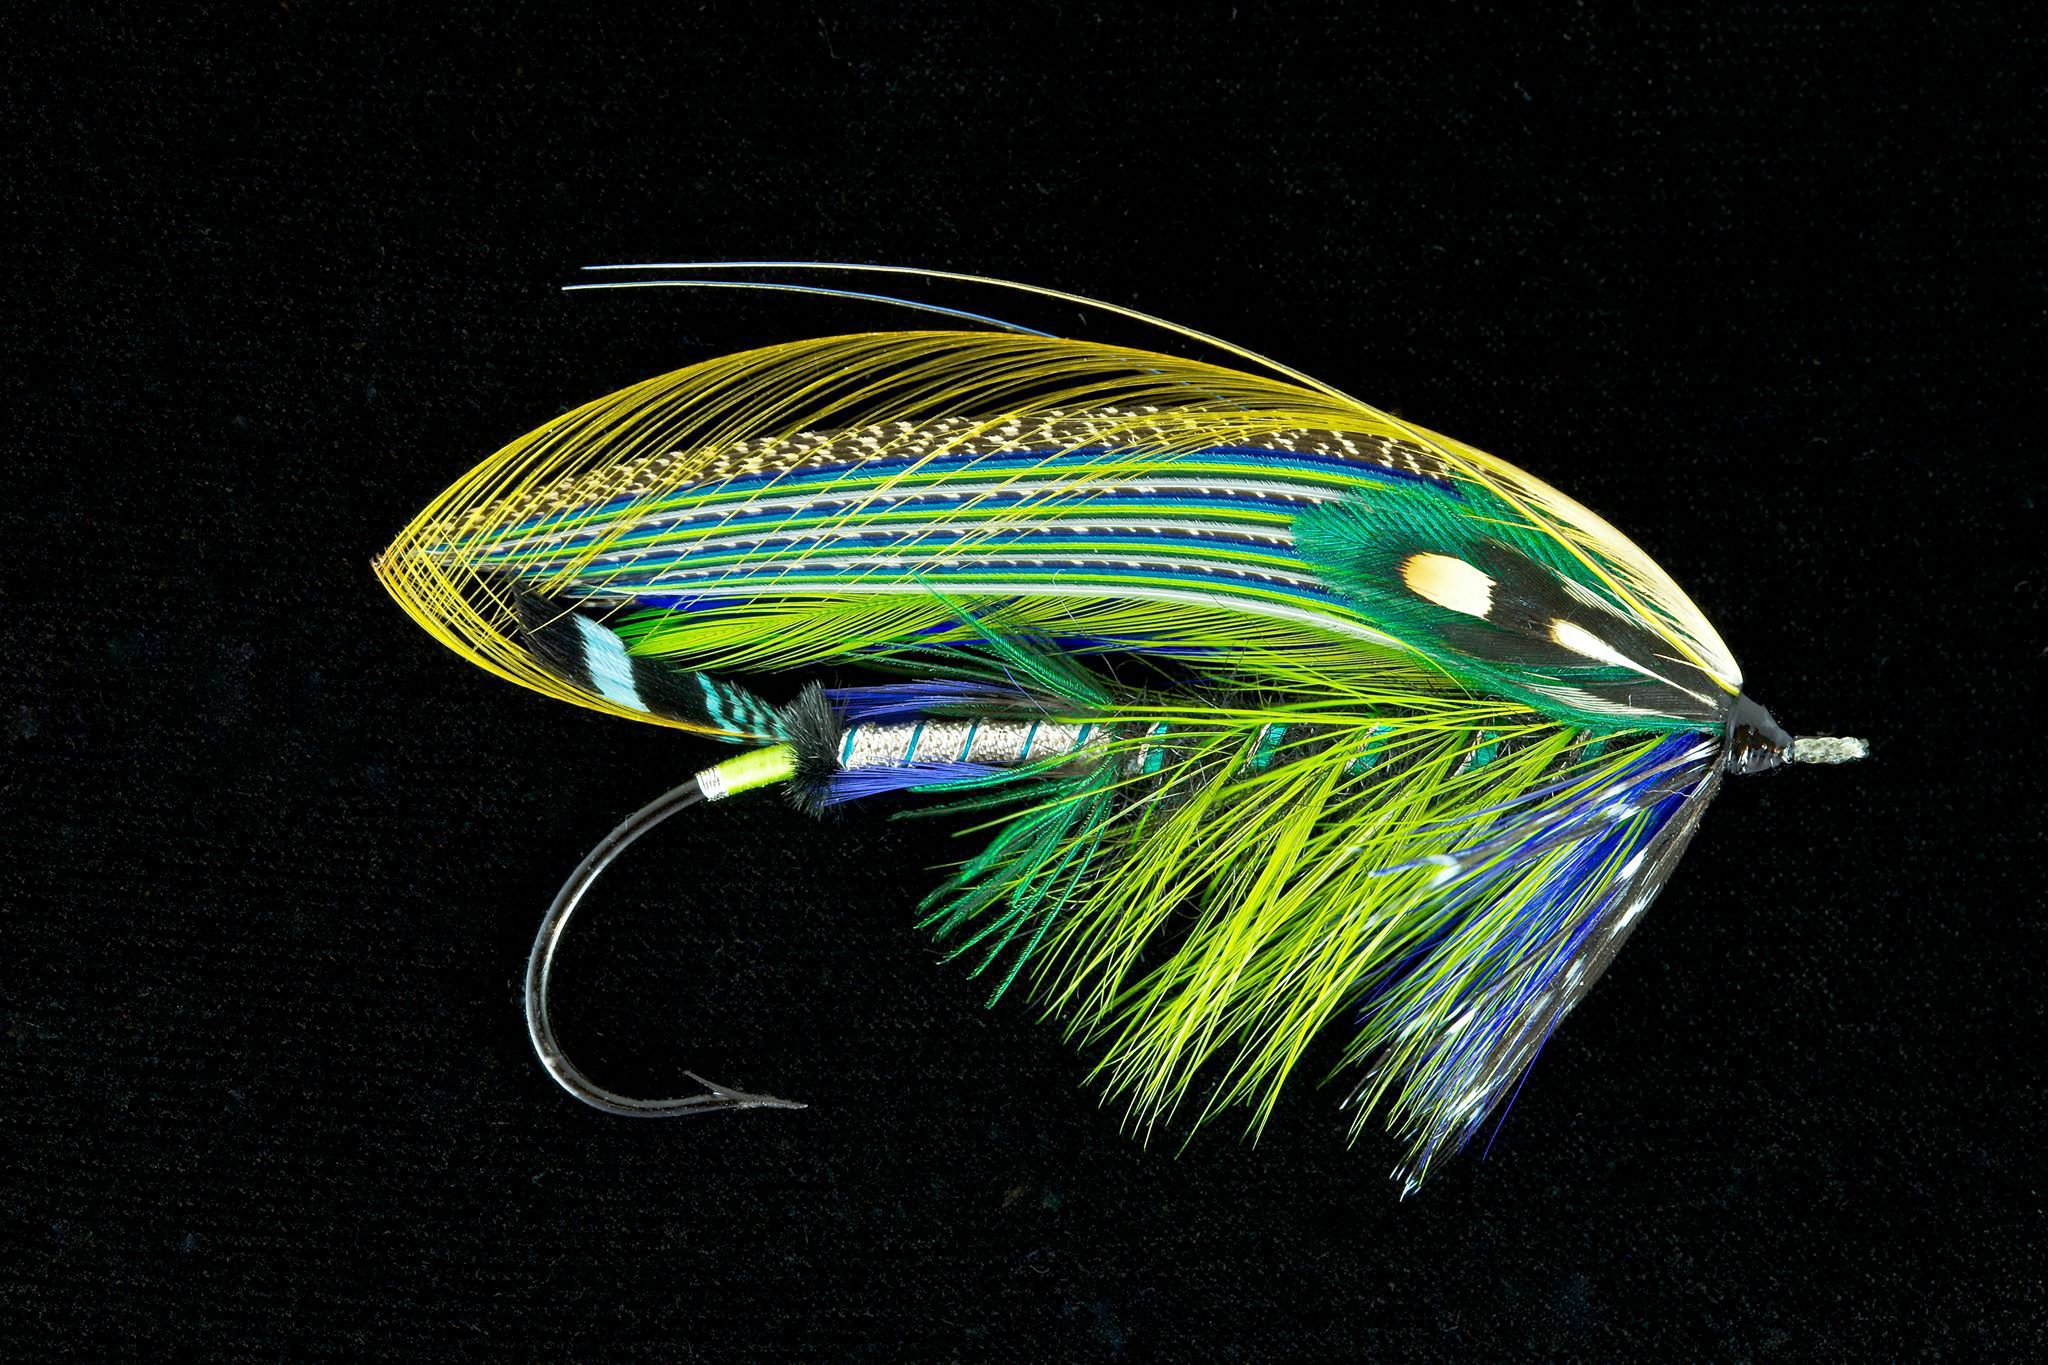 This Seattle Seahawks-themed fly was created by Issaquah's Rockwell Hammond as a gift for Seahawks coach Pete Carroll. ()